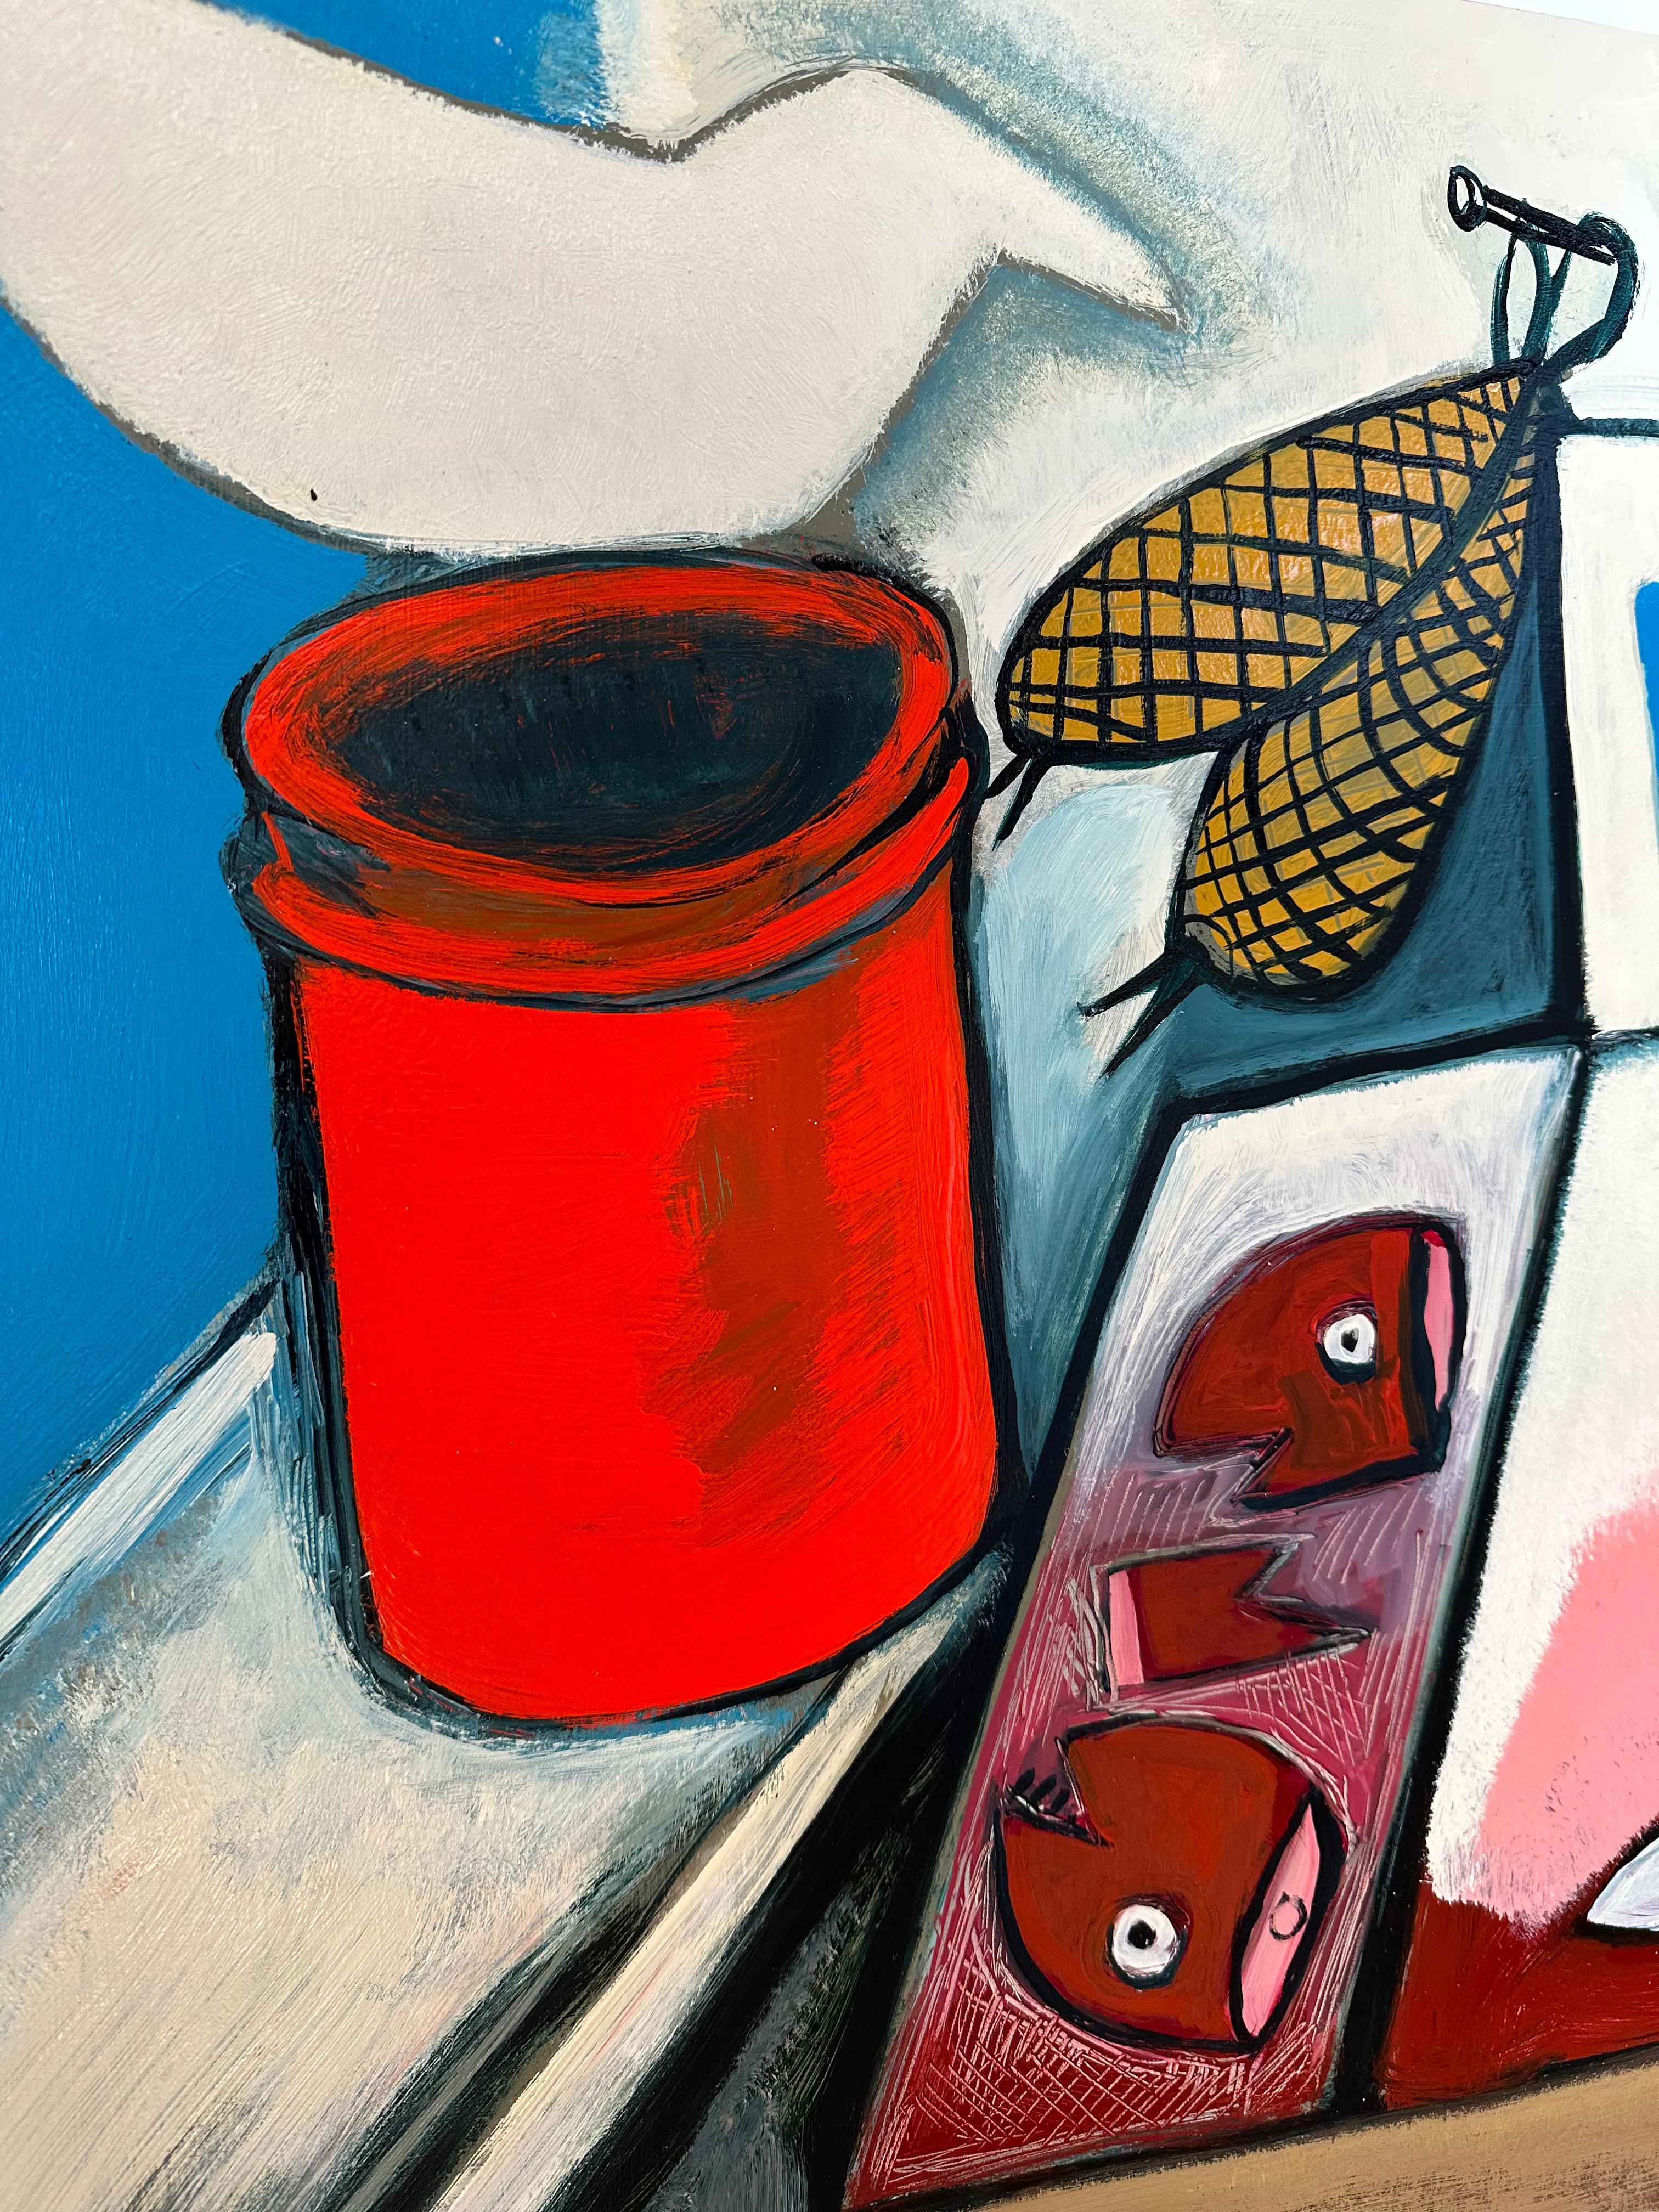 A kitchen interior with a still life arrangement of blue bait gloves and fish on a cutting board beneath a knife with pink flowers at the top, a red bucket and white bird in the window. Signed on recto and verso.

Matt Barter’s paintings center on